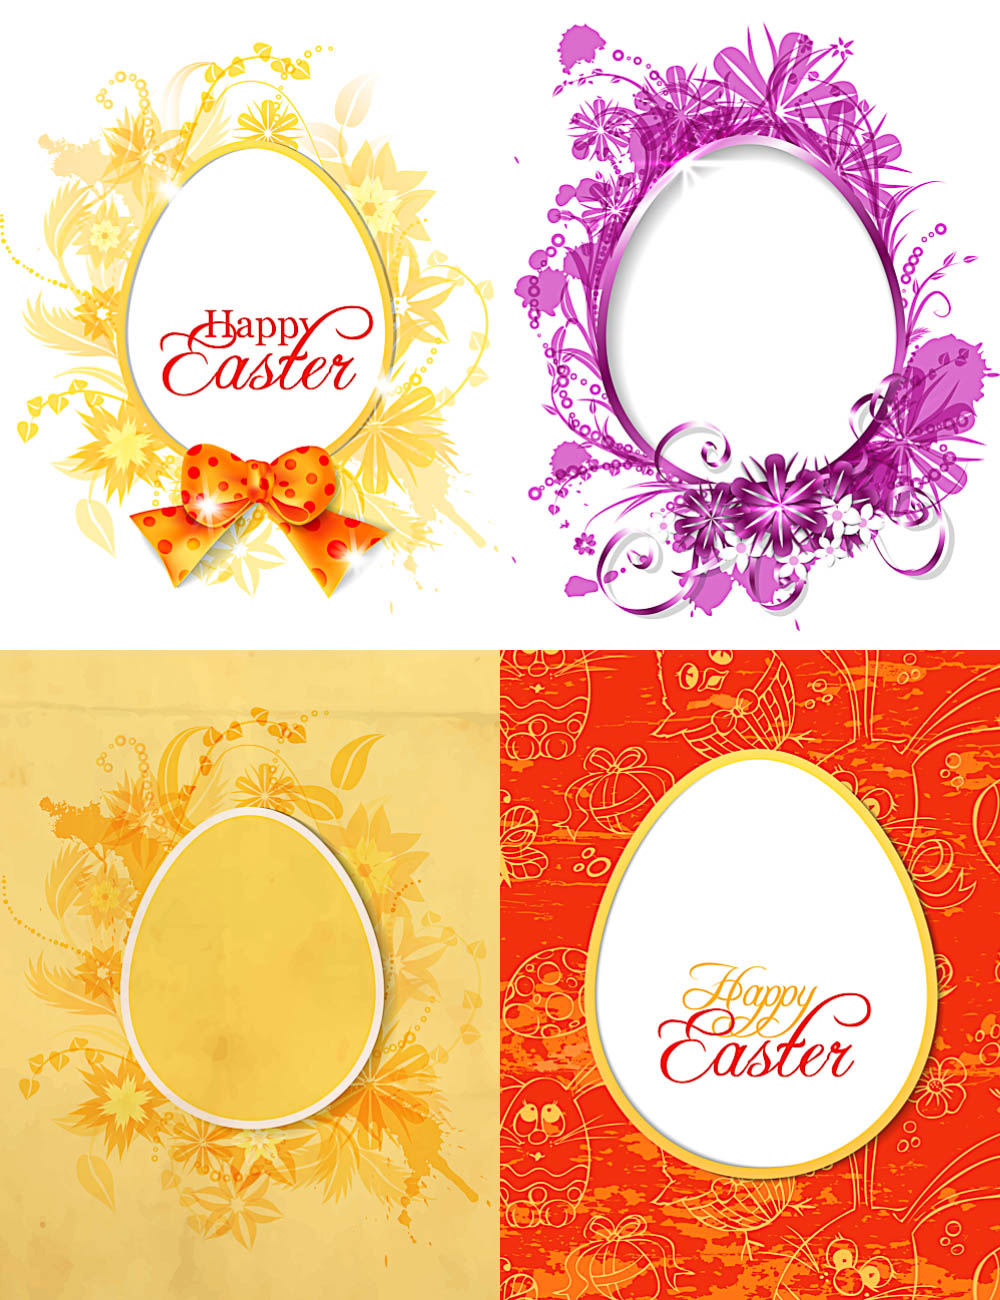 Easter cards with ornate eggs vector